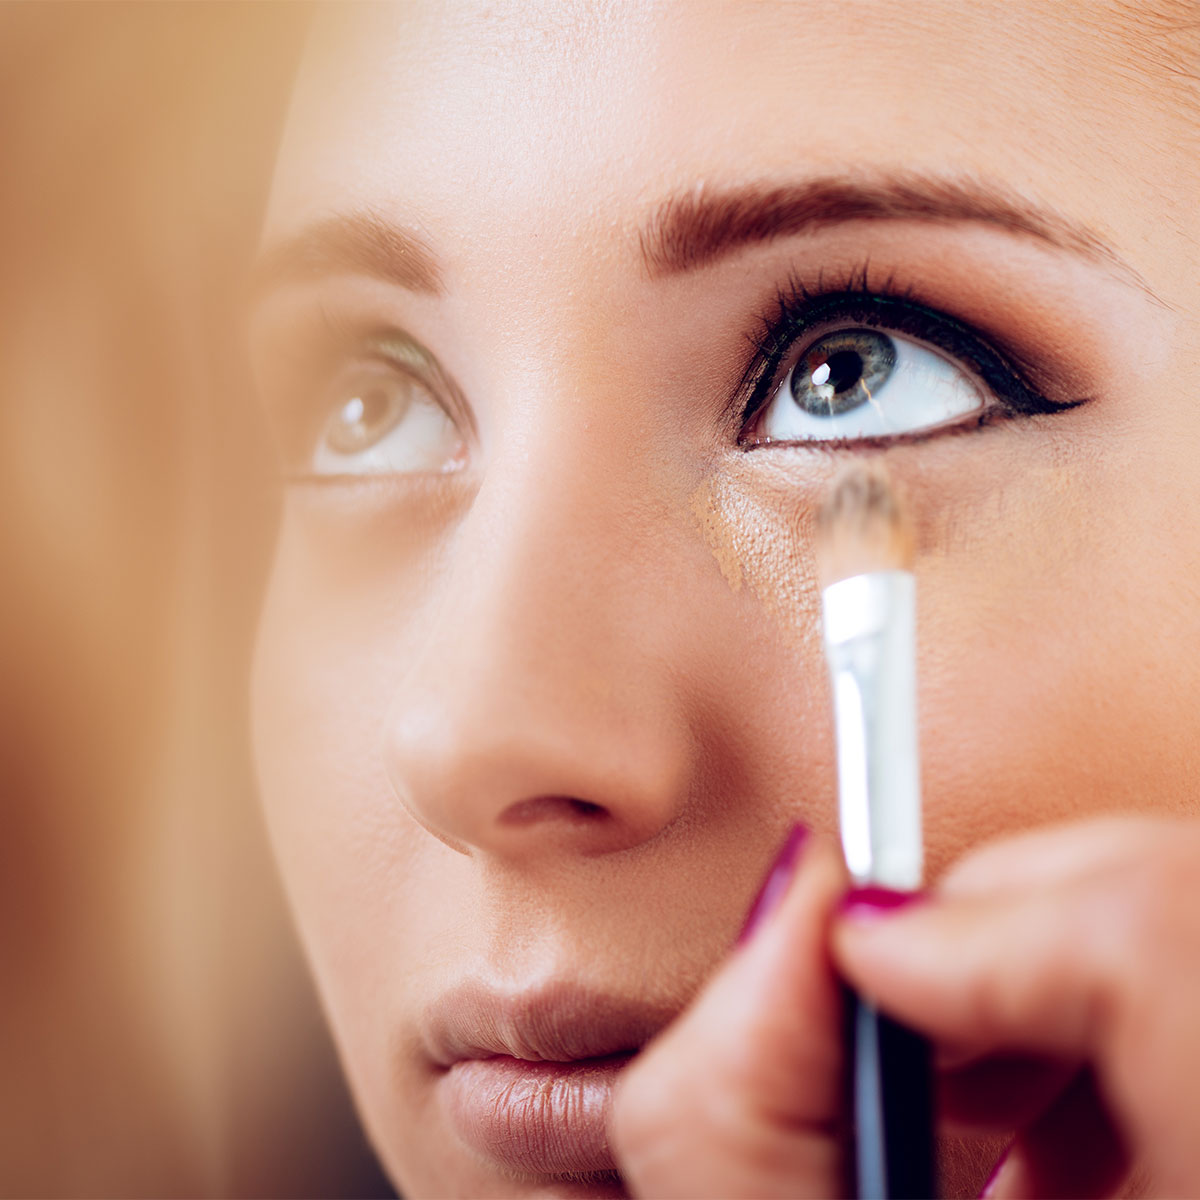 Makeup For Mature Skin: A Tutorial From a Red Carpet Pro